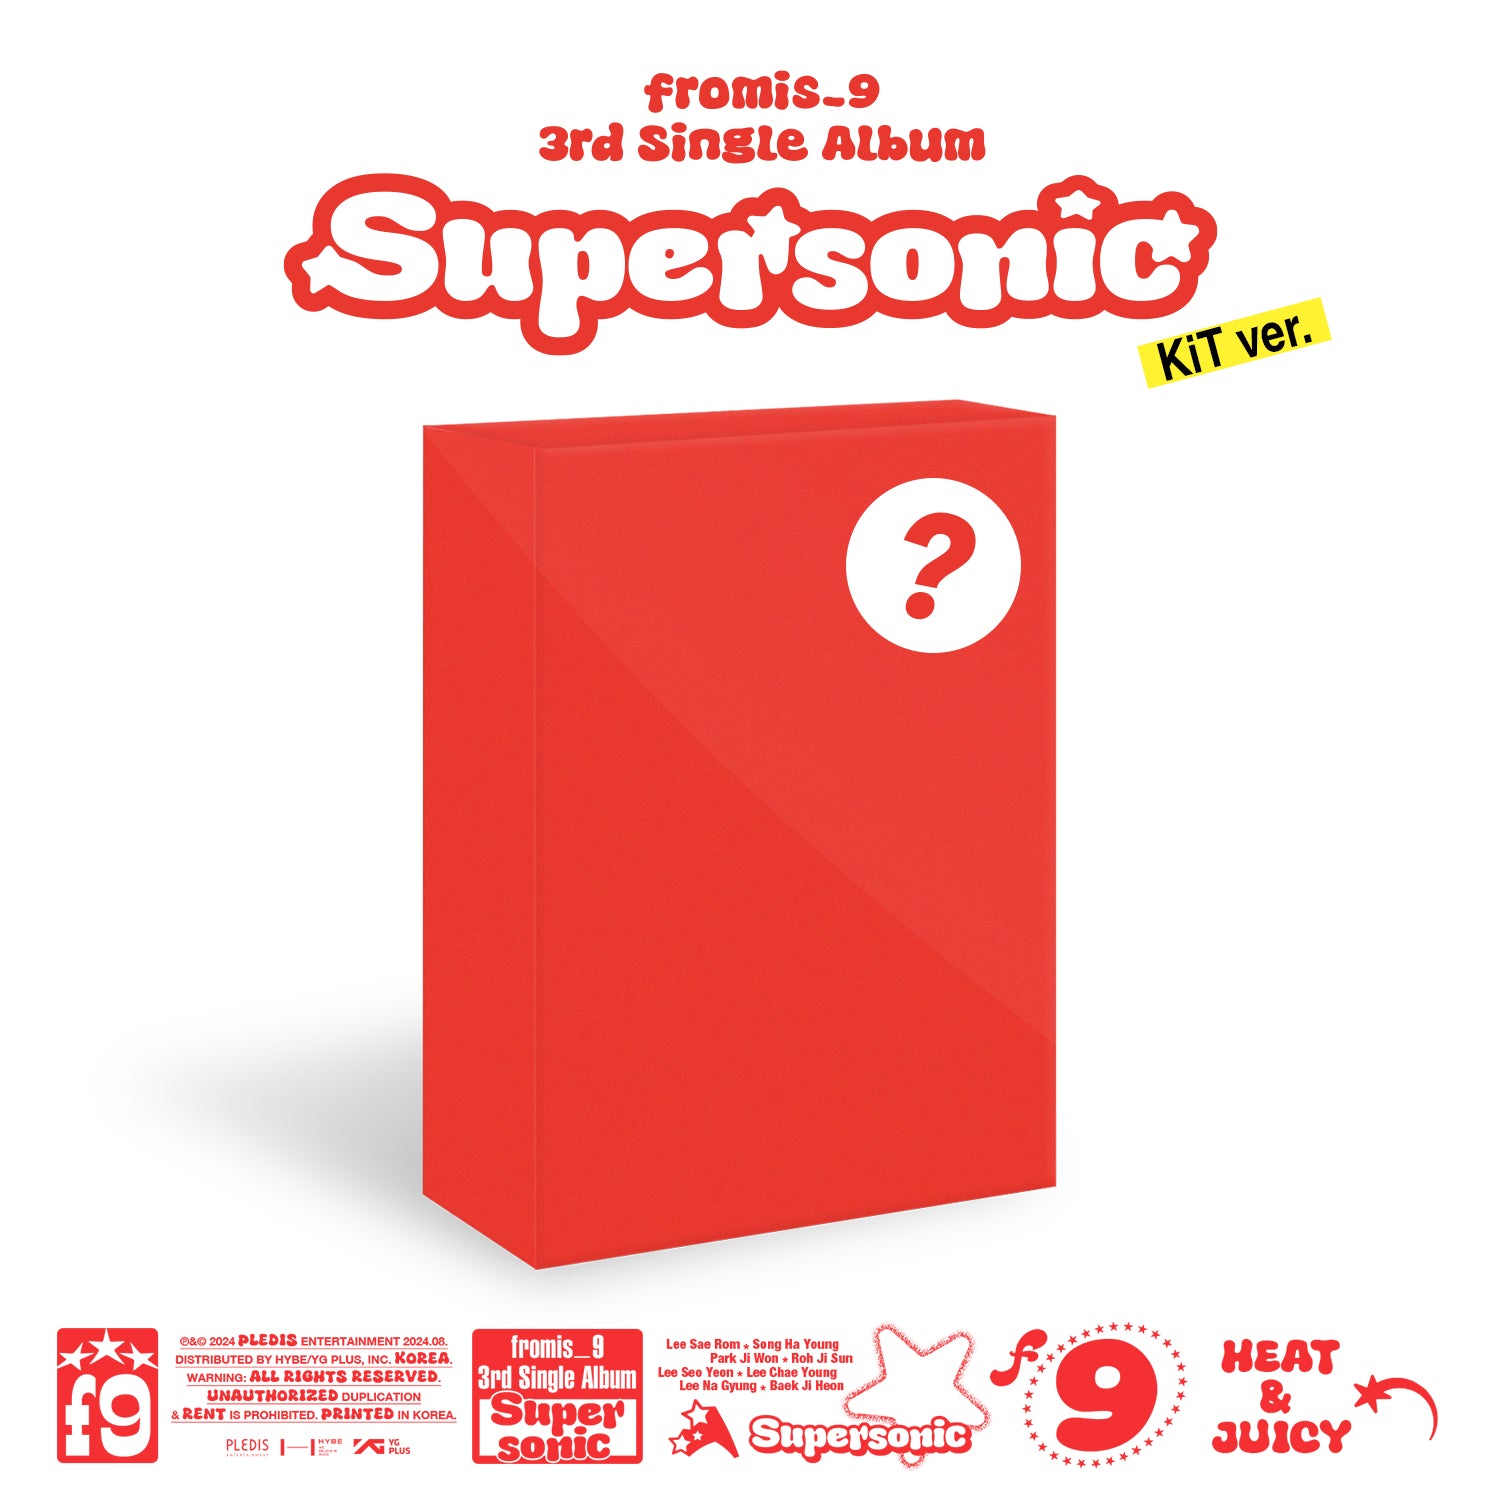 fromis_9 - 3rd Single Album [Supersonic] KiT Ver.